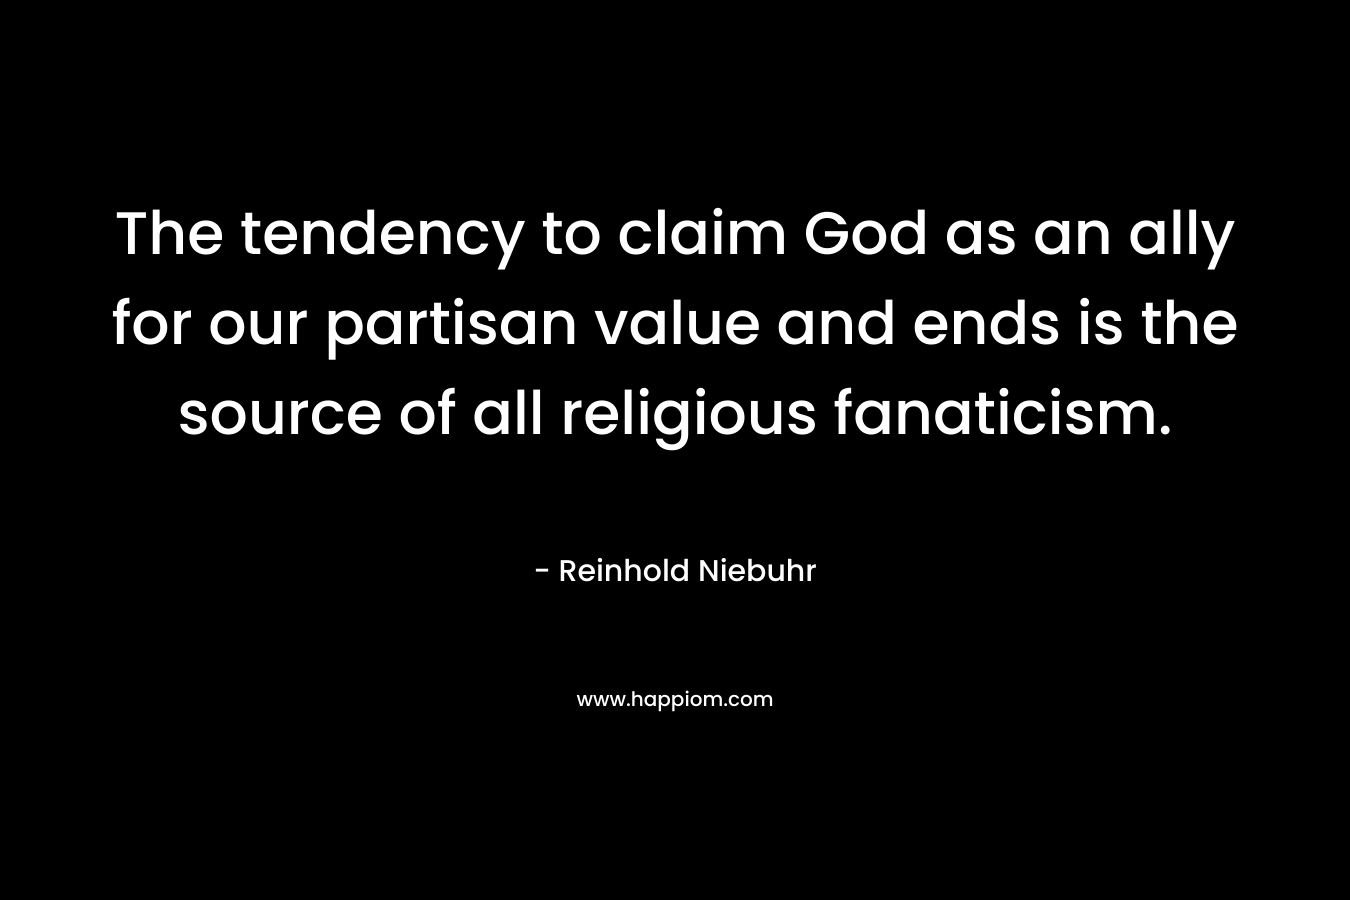 The tendency to claim God as an ally for our partisan value and ends is the source of all religious fanaticism.  – Reinhold Niebuhr